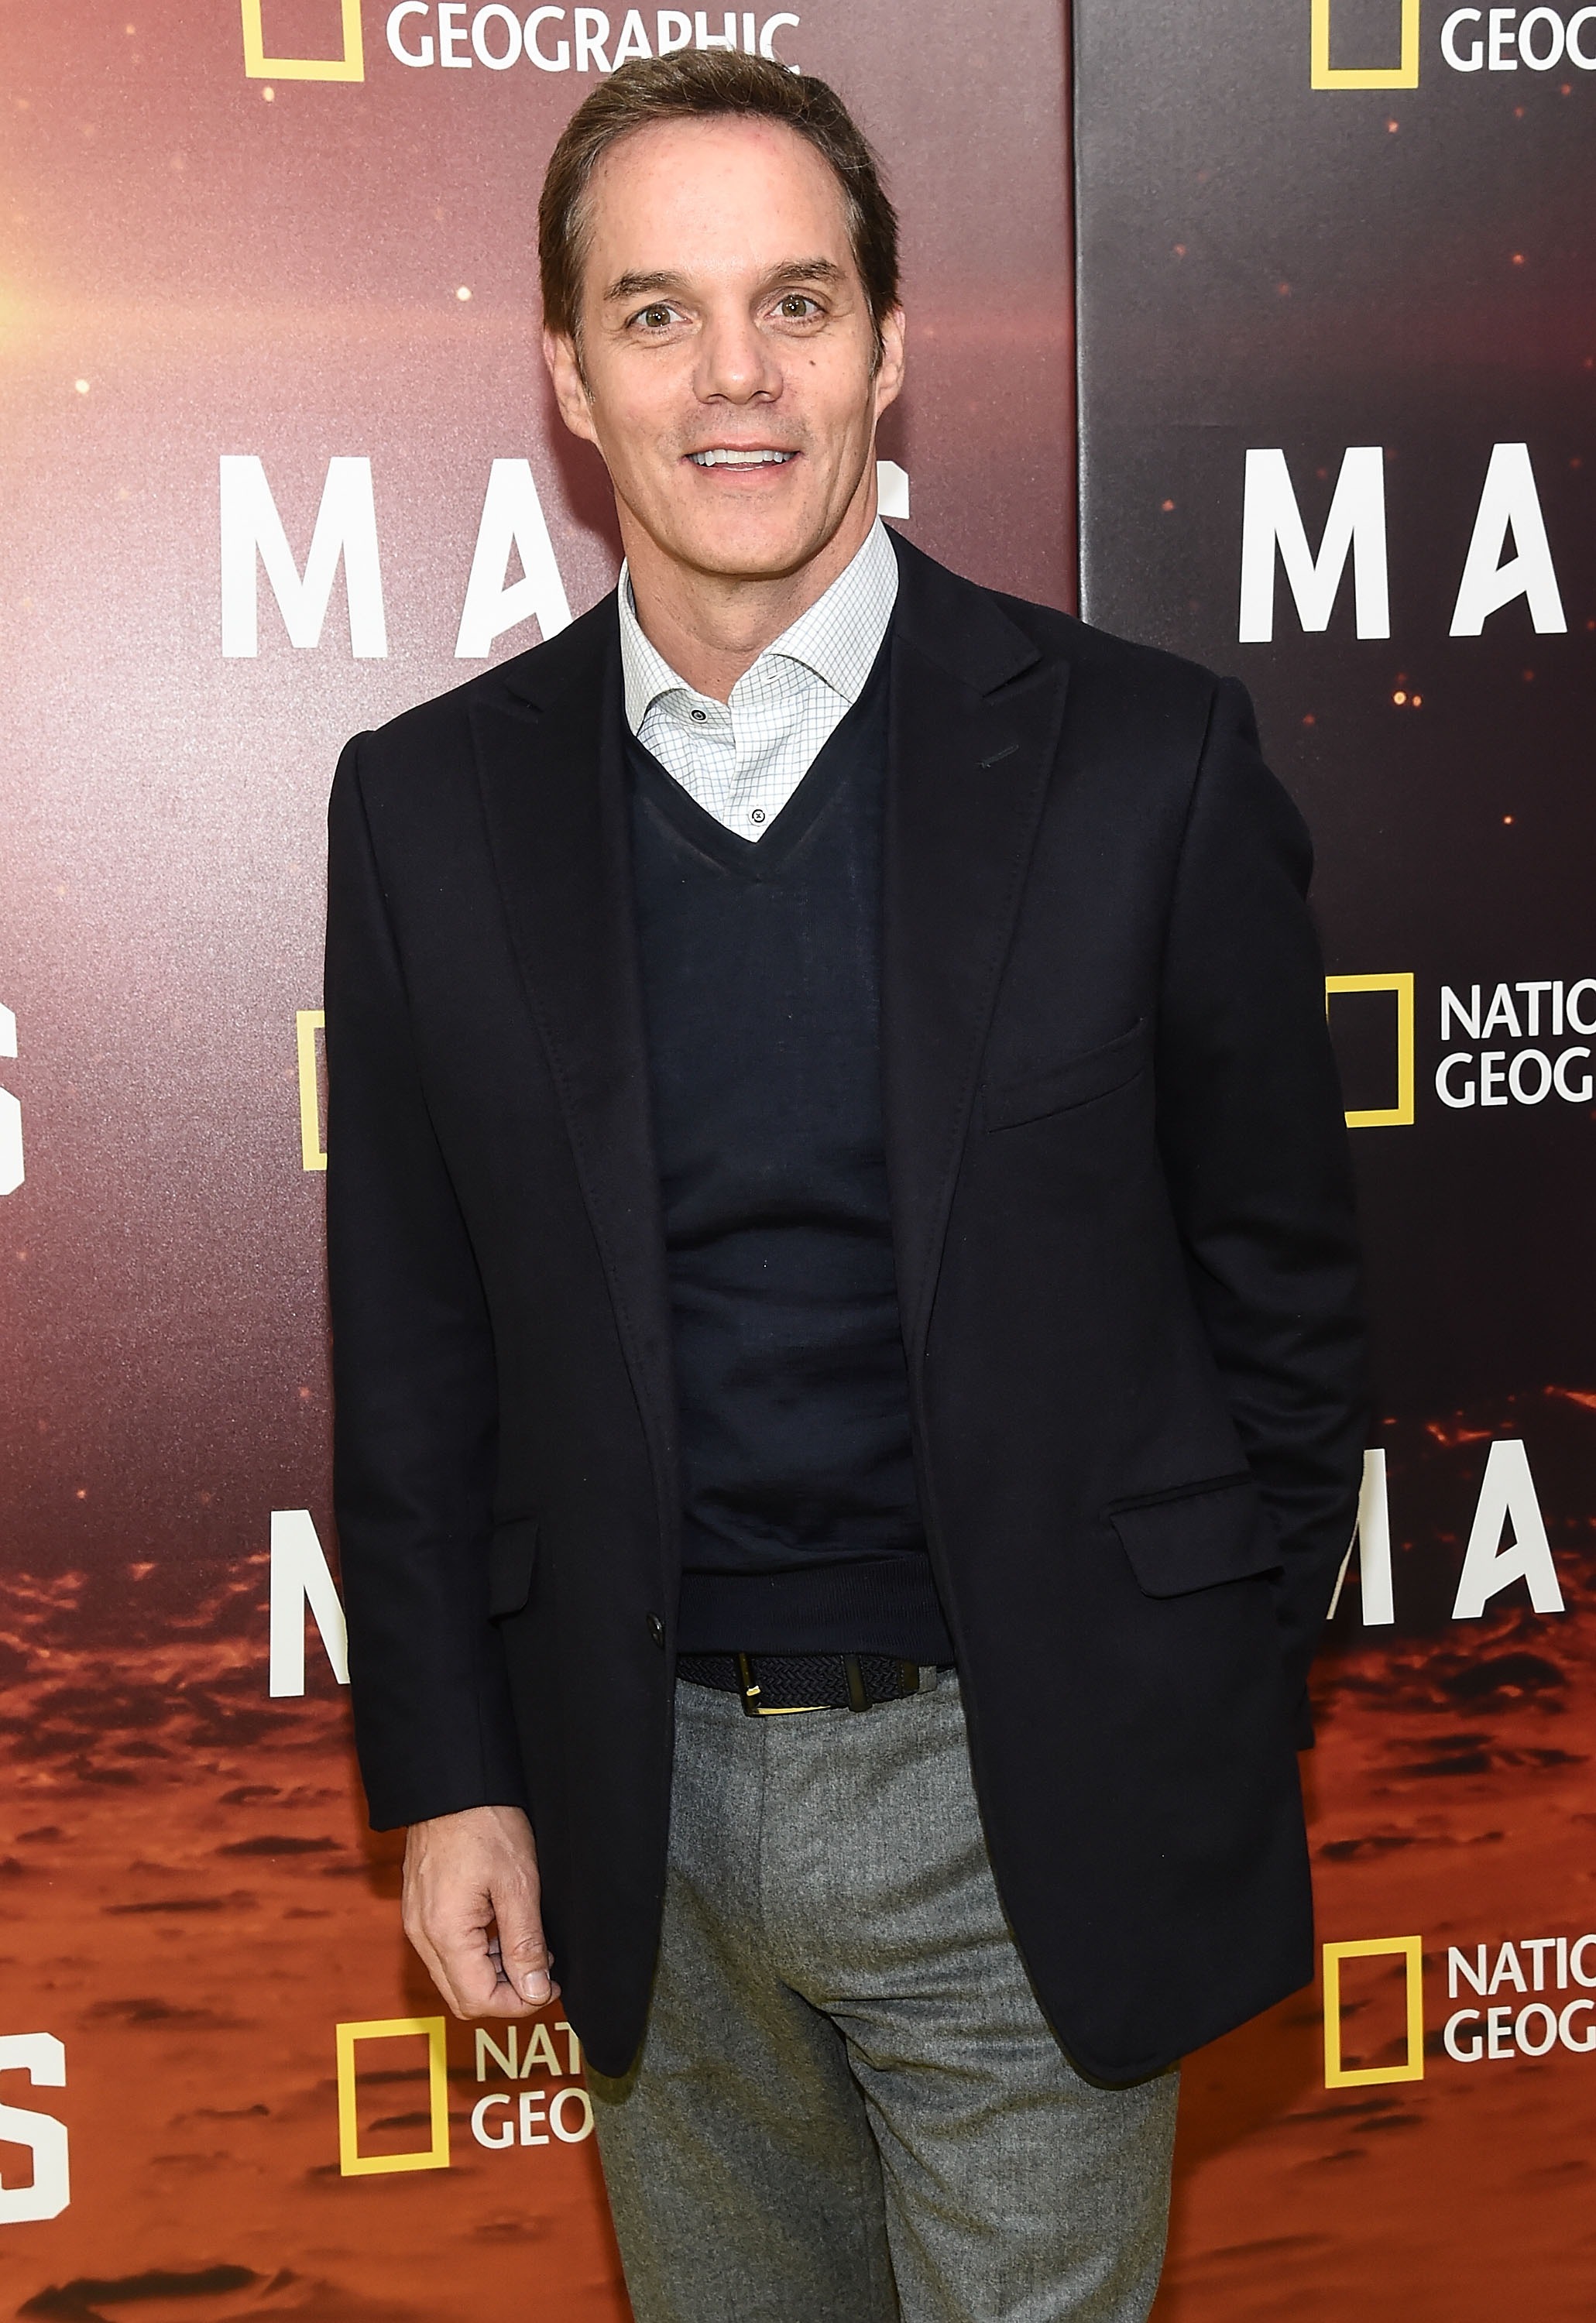 Bill Hemmer attends the National Geographic Channel "MARS" New premiere at the School of Visual Arts on October 26, 2016, in New York City. | Source: Getty Images